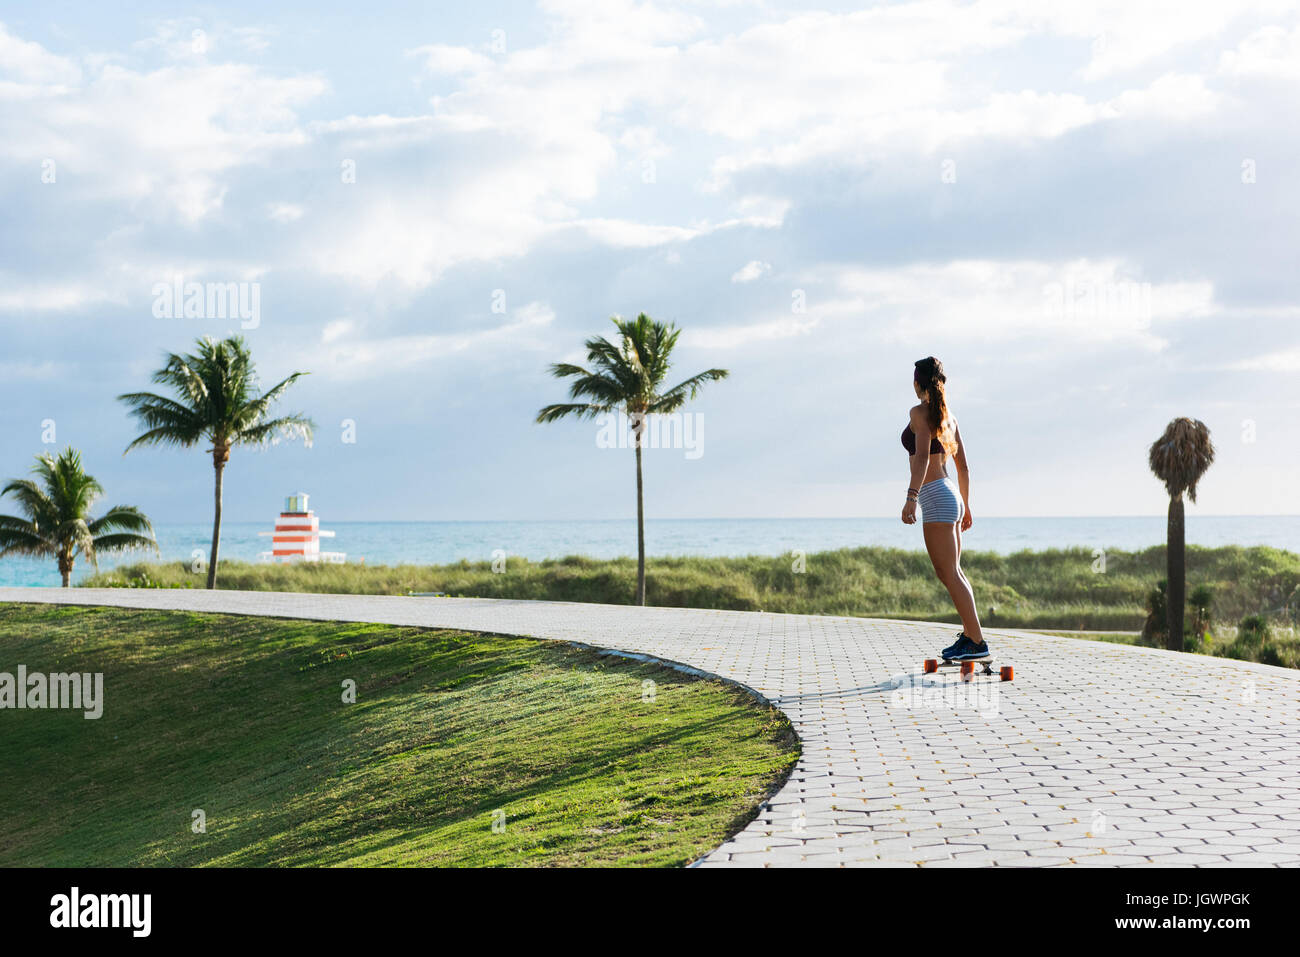 Young woman skateboarding in park, rear view, South Point Park, Miami Beach, Florida, USA Stock Photo